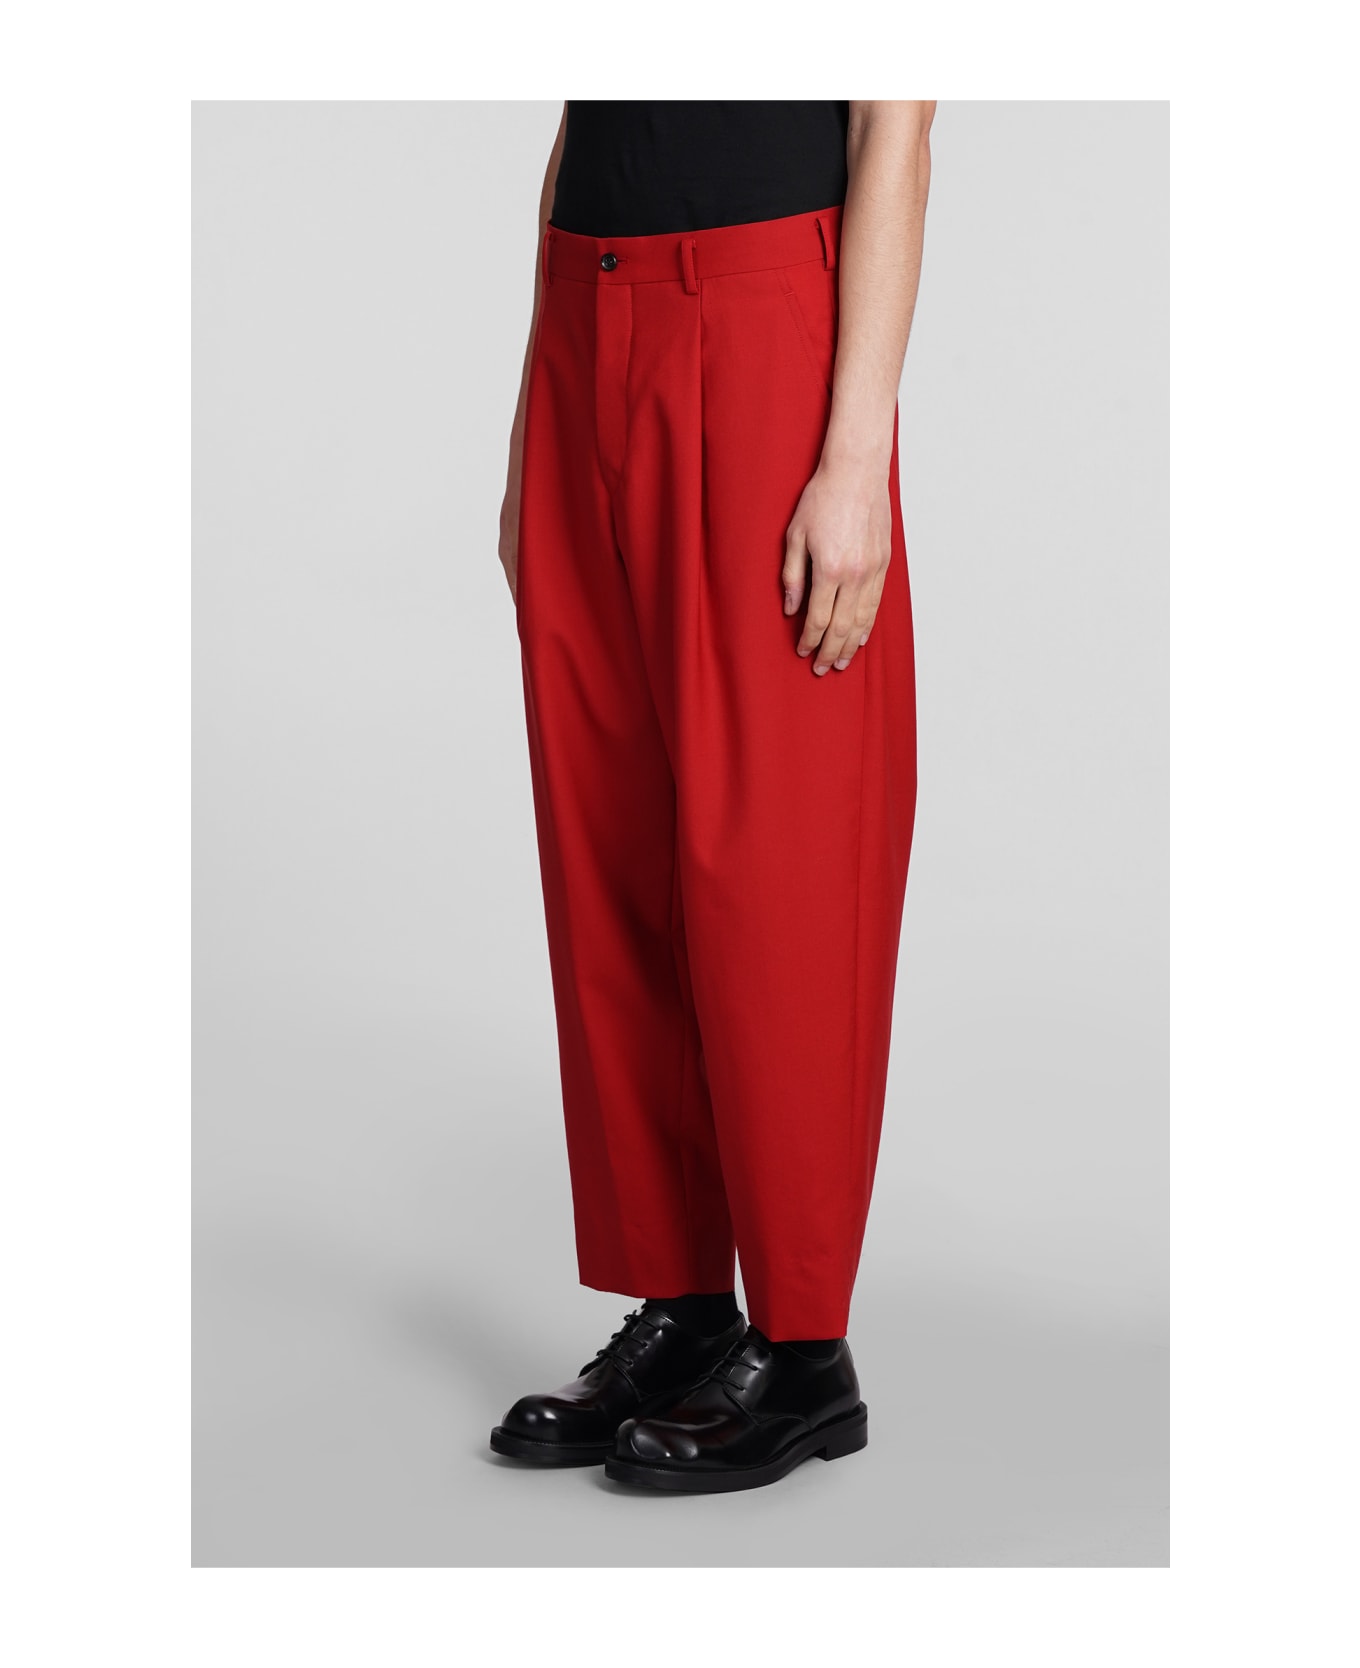 Comme Des Garçons Homme Plus Pants In Red Wool - red ボトムス